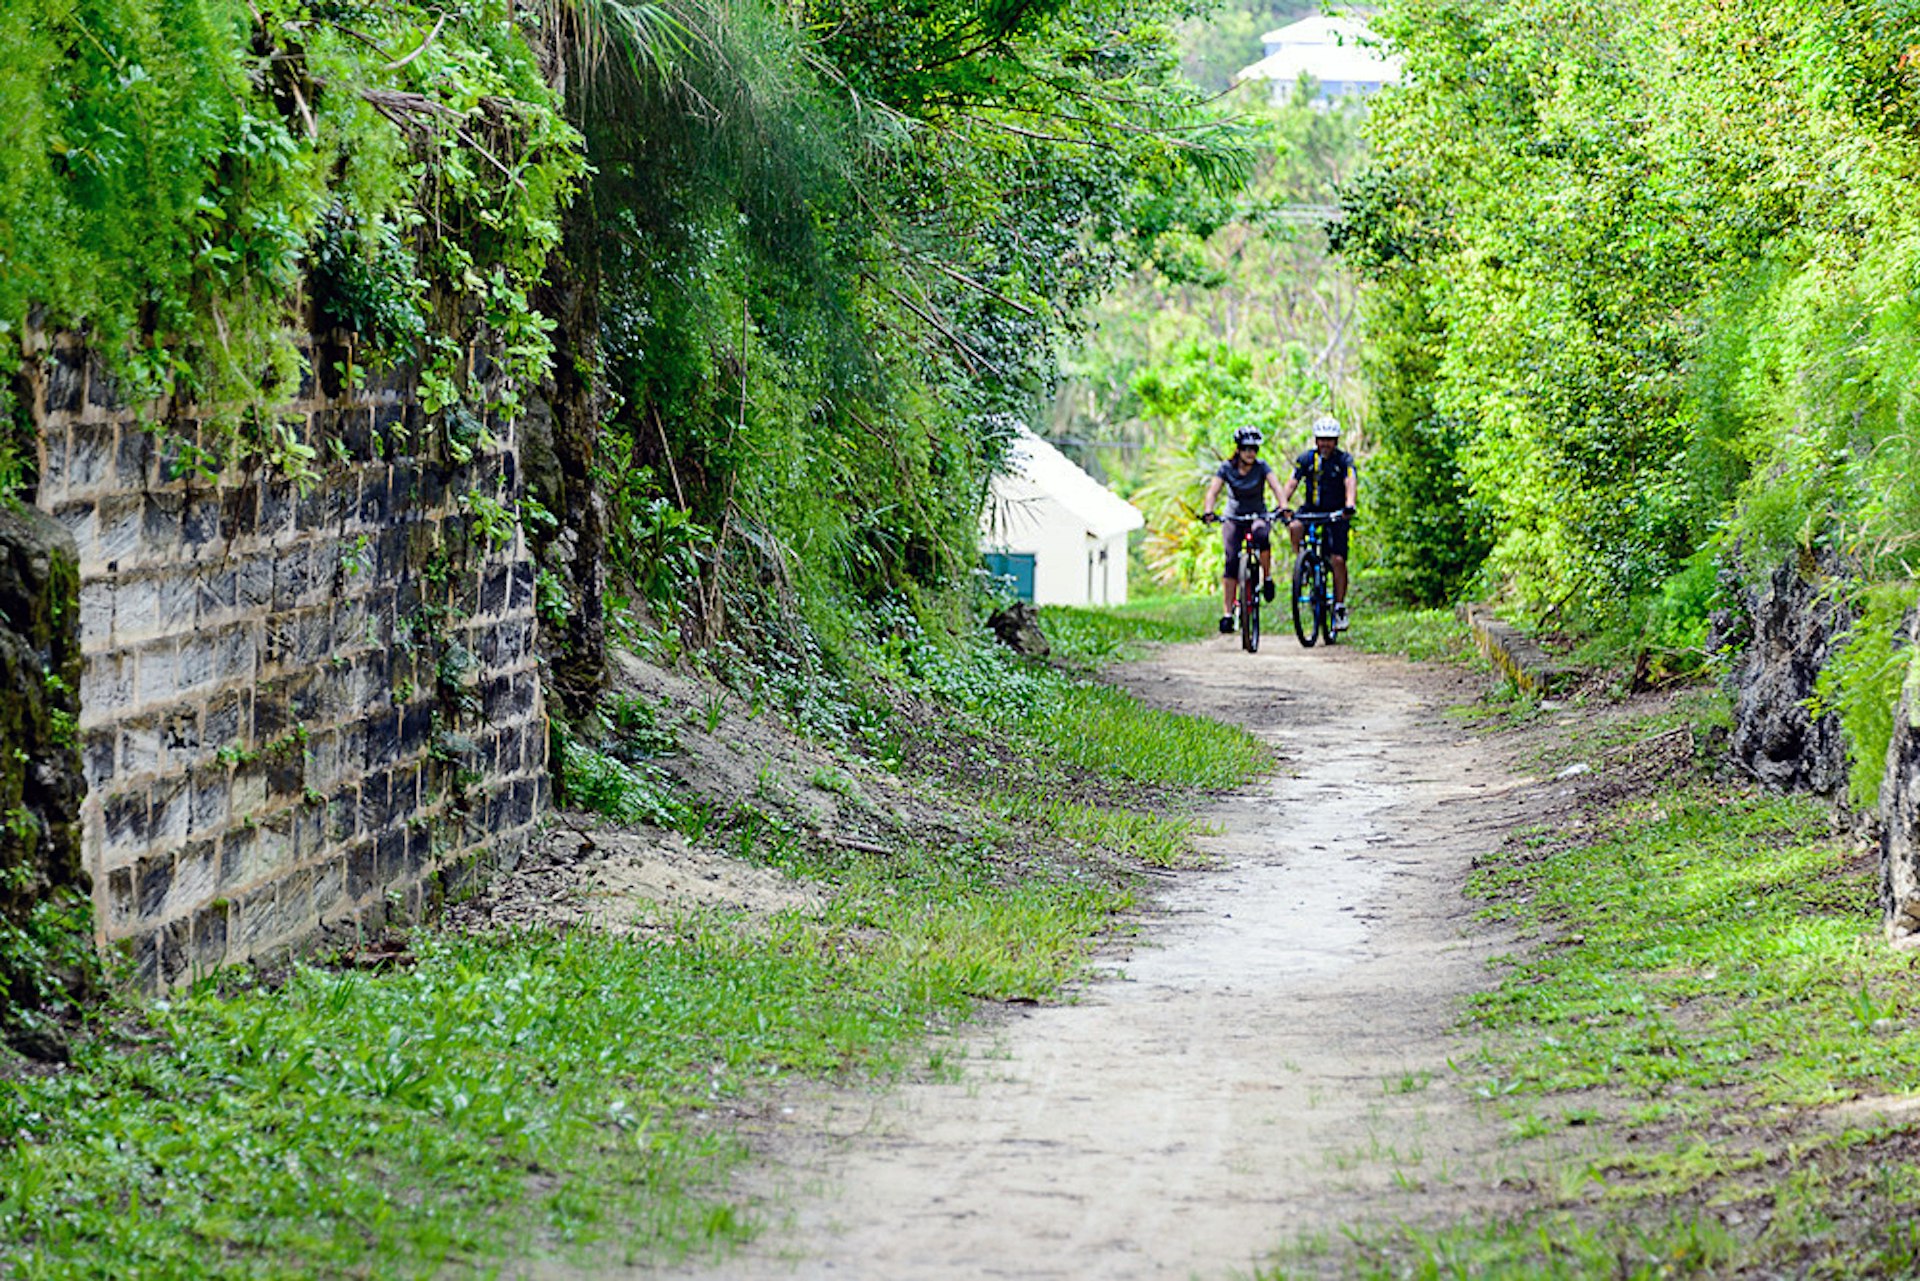 Bermuda's Railway Trail follows the route of a long-defunct railroad © Craig Stanfill / CC by 2.0